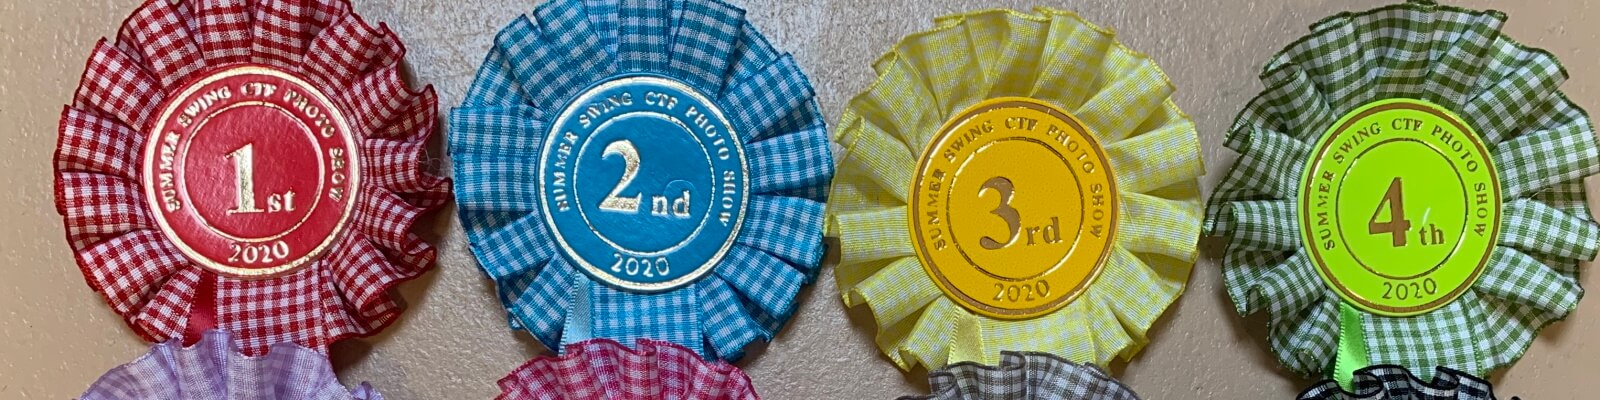 Our Rosettes